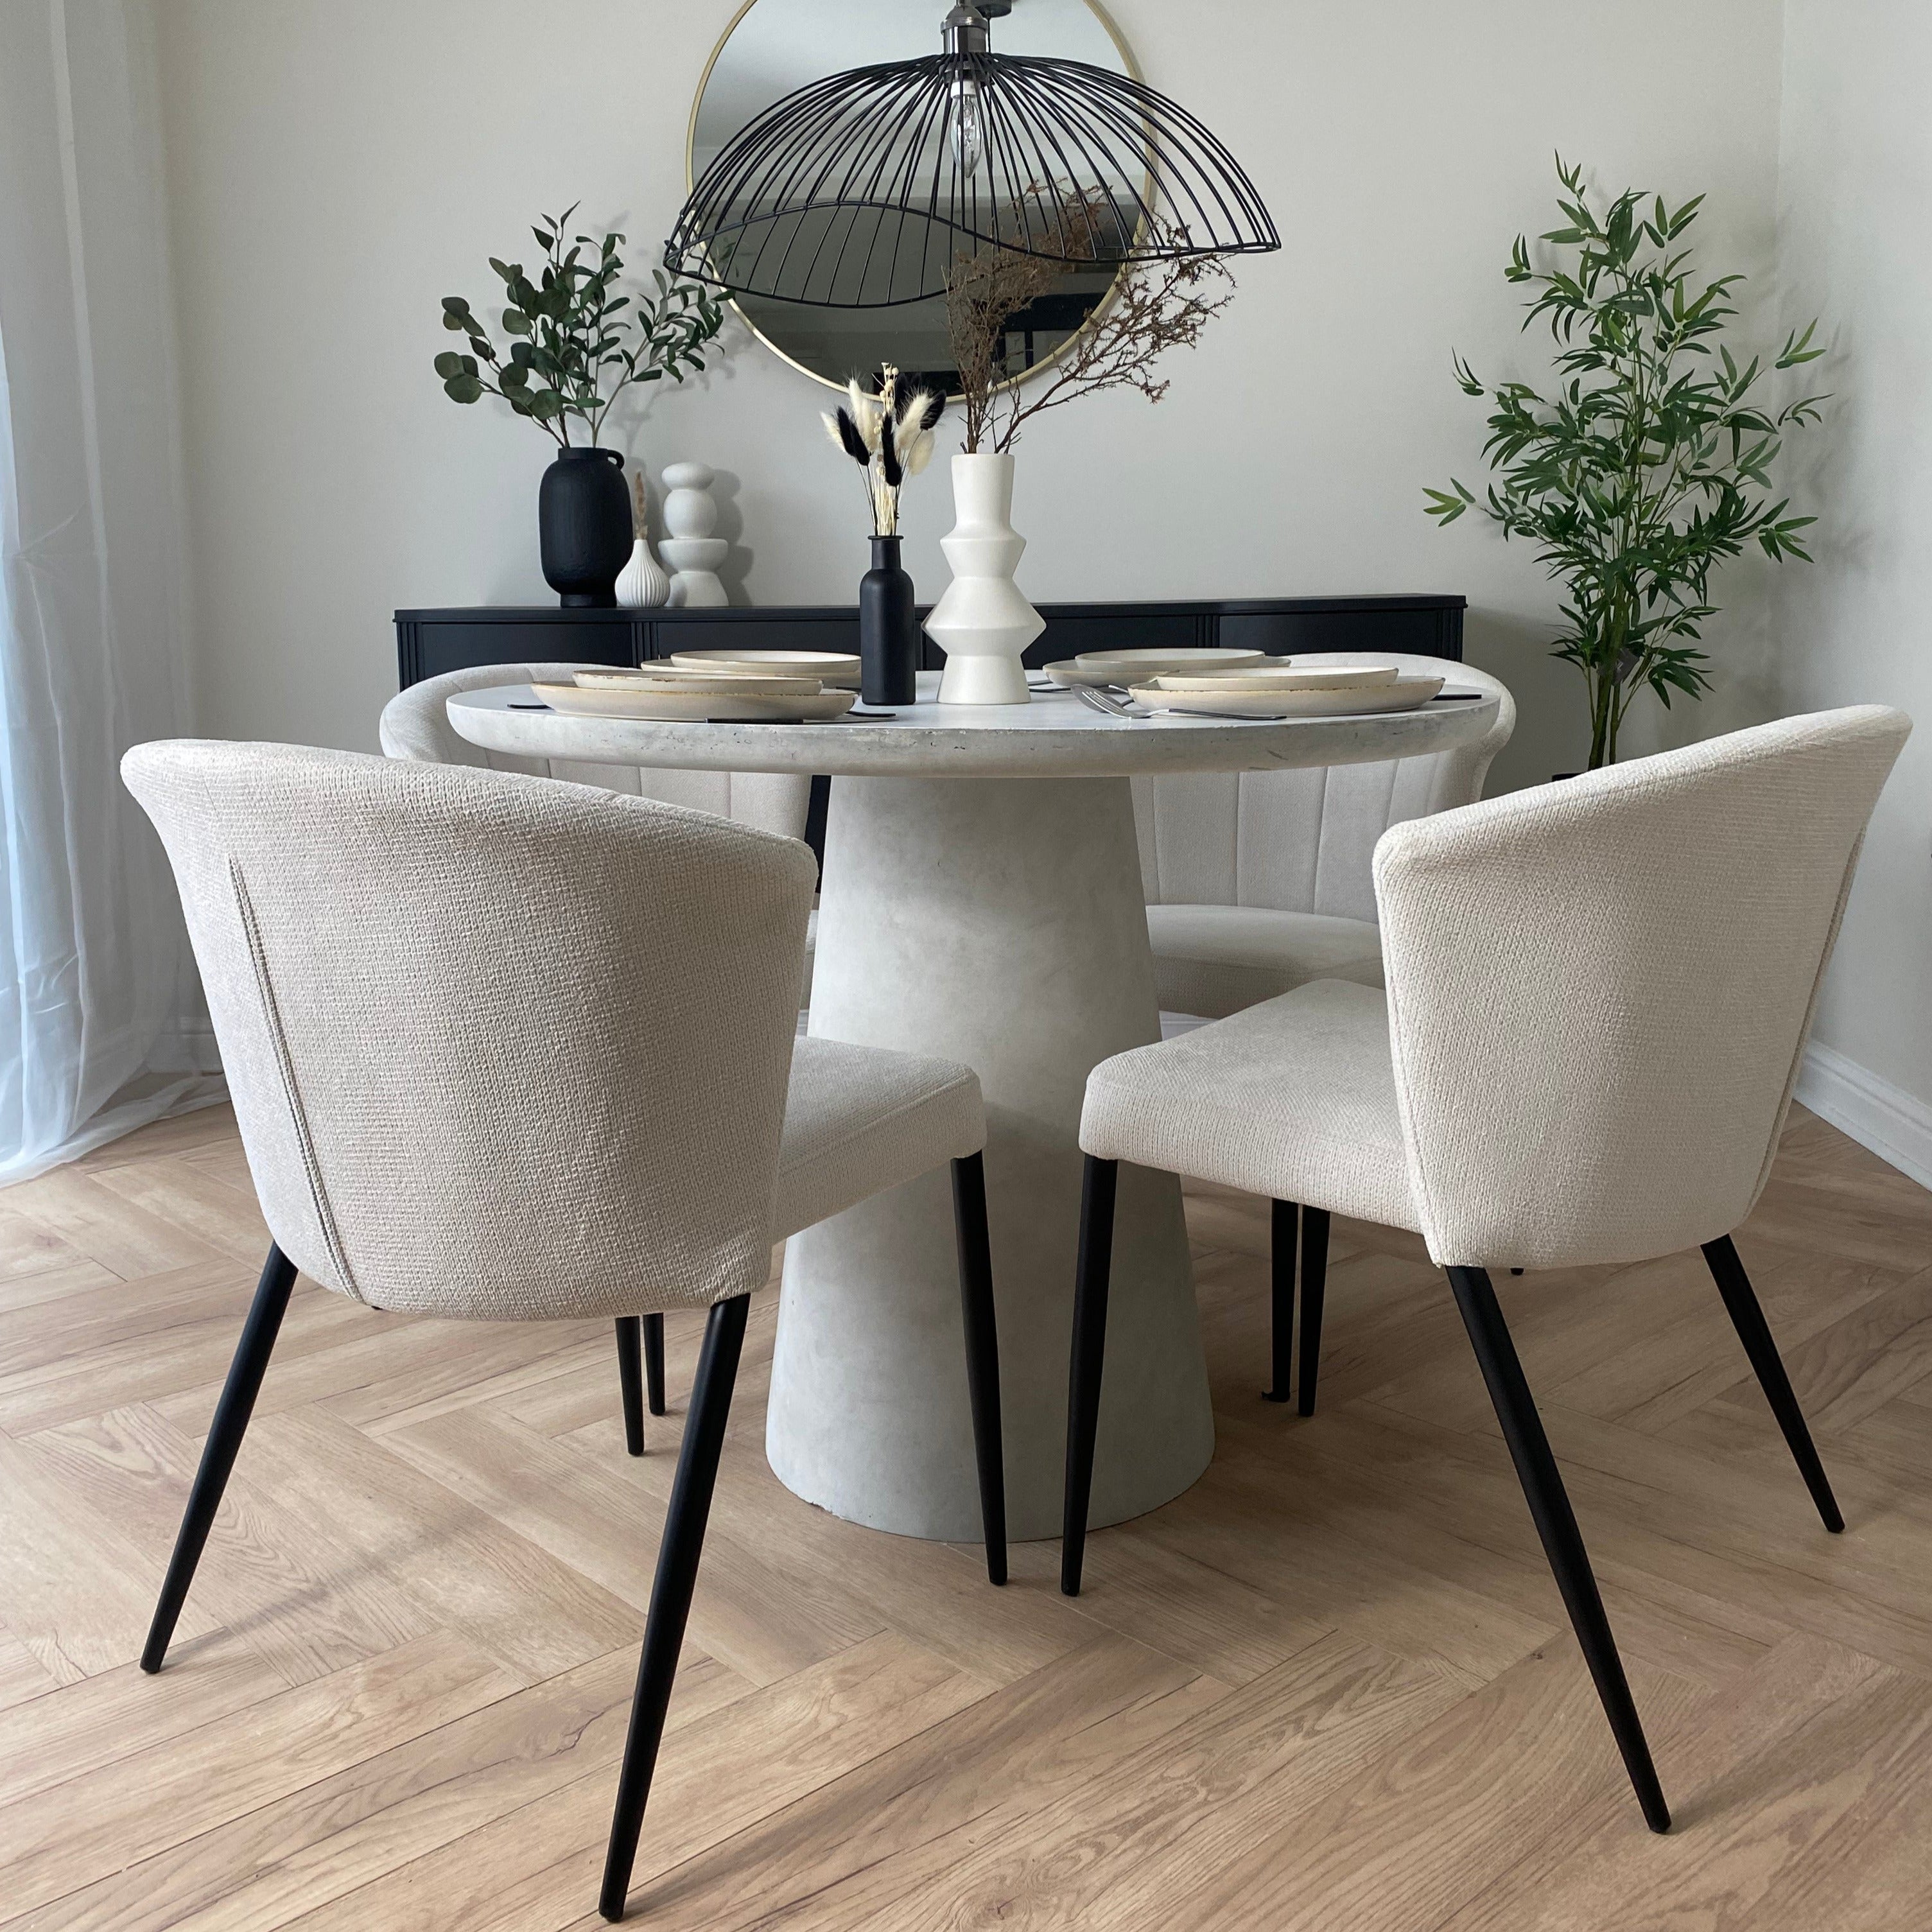 Concrete / Resin Circular Cylinder Dining Table